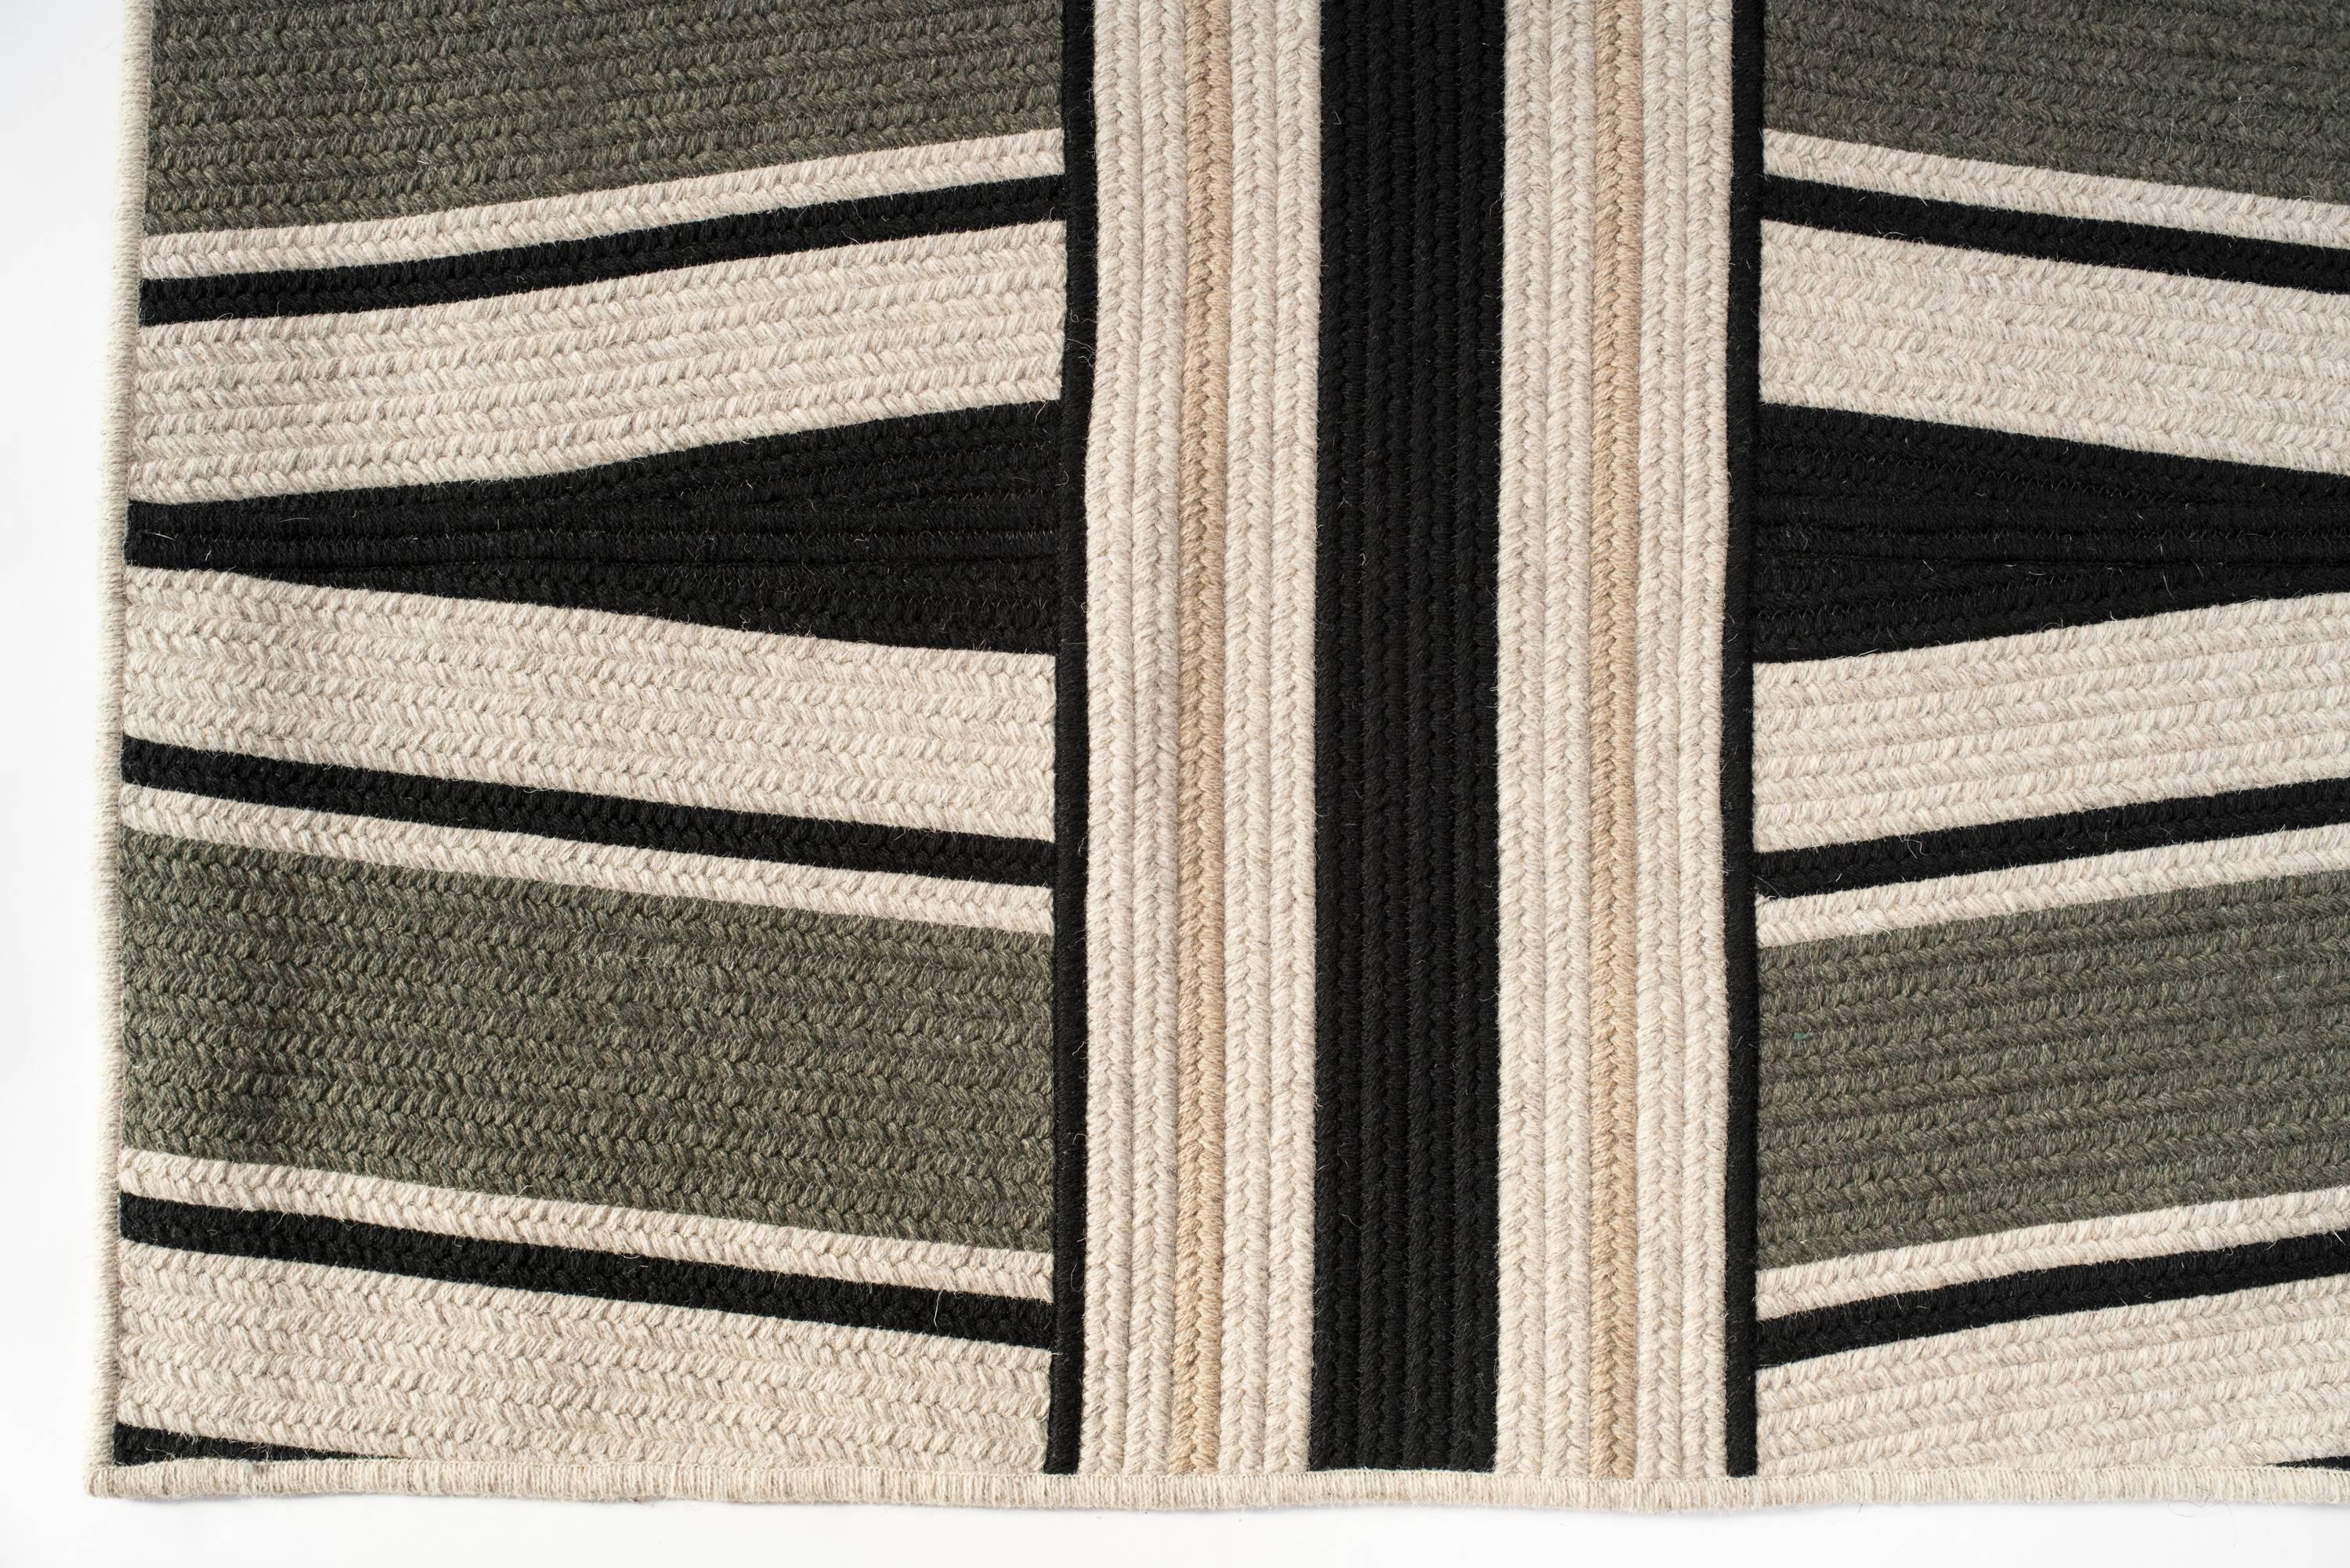 Our Studio Woven Wool Rug in Moss Green & Black wool is designed in our Boston Studio and custom crafted in Rhode Island USA. Angled lines and use of color create pattern in our Studio Rug. Black and moss wool blend yarns are grounded with light